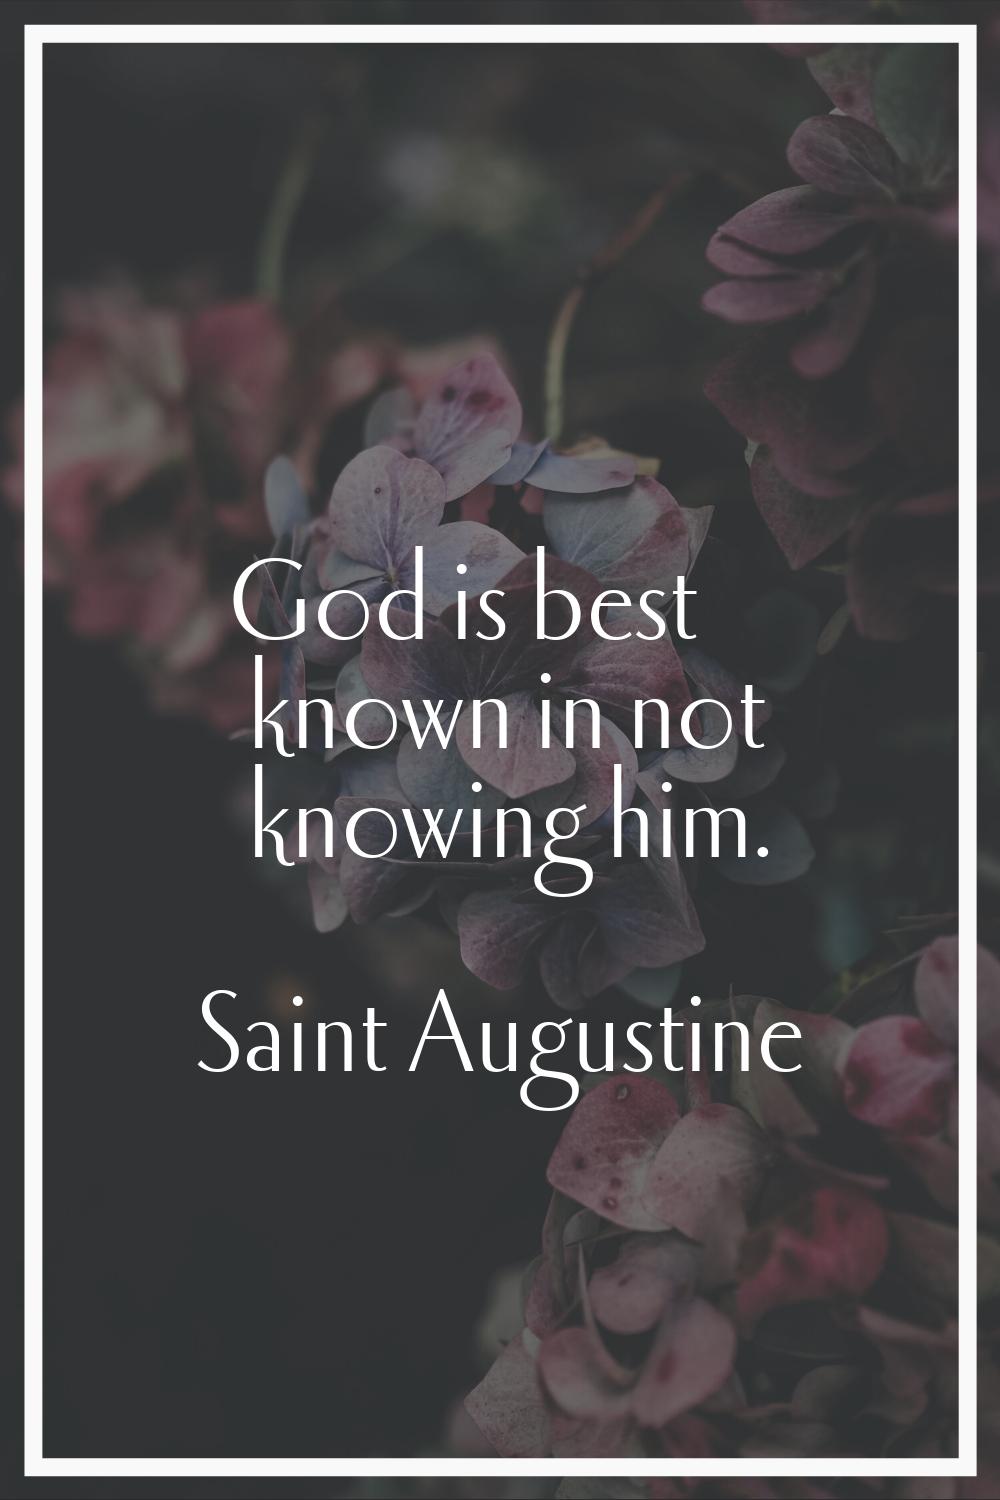 God is best known in not knowing him.